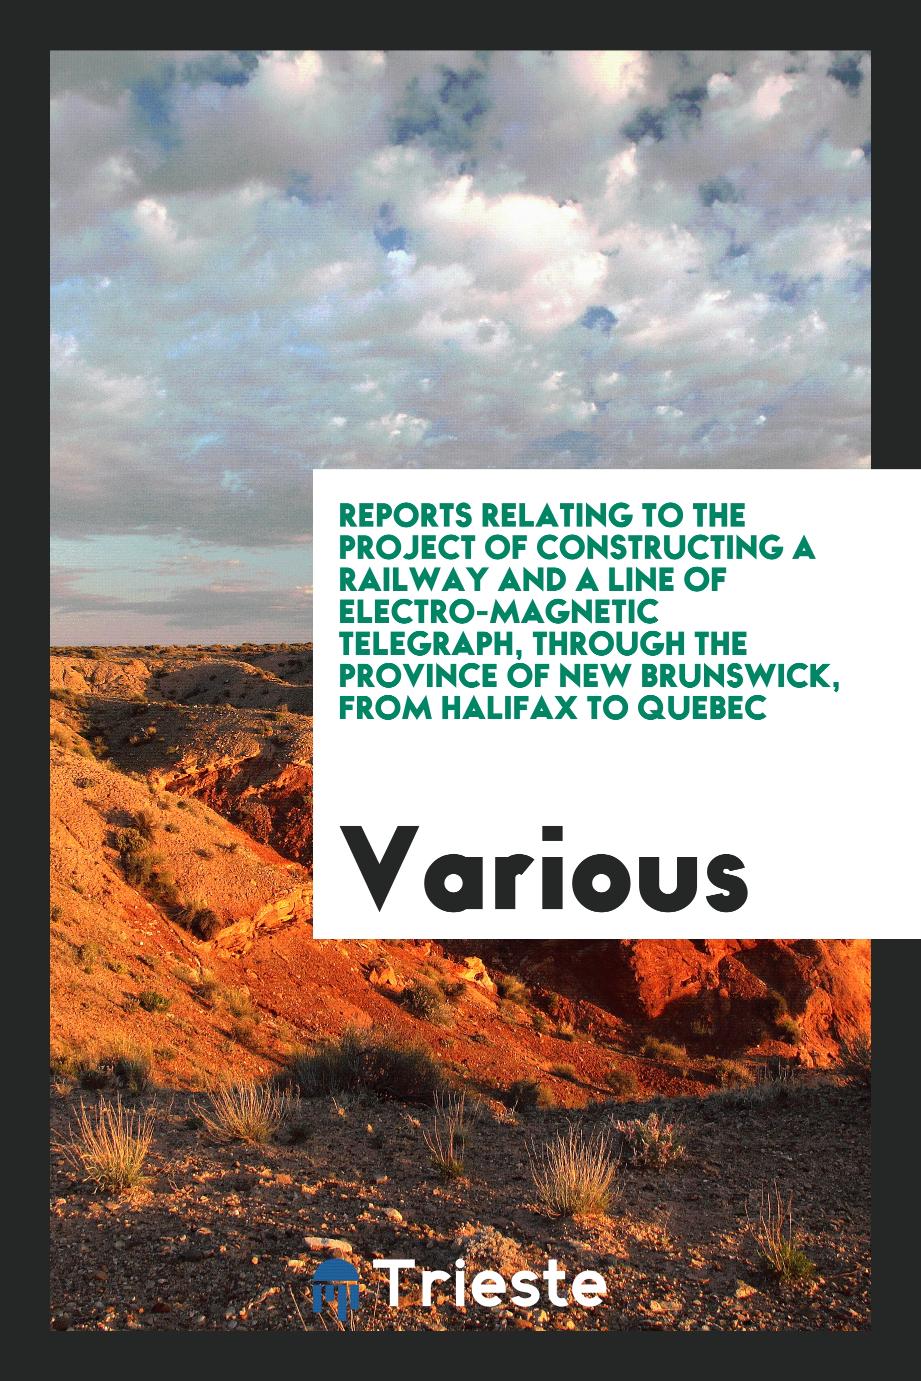 Reports Relating to the Project of Constructing a Railway and a Line of Electro-Magnetic Telegraph, Through the Province of New Brunswick, from Halifax to Quebec